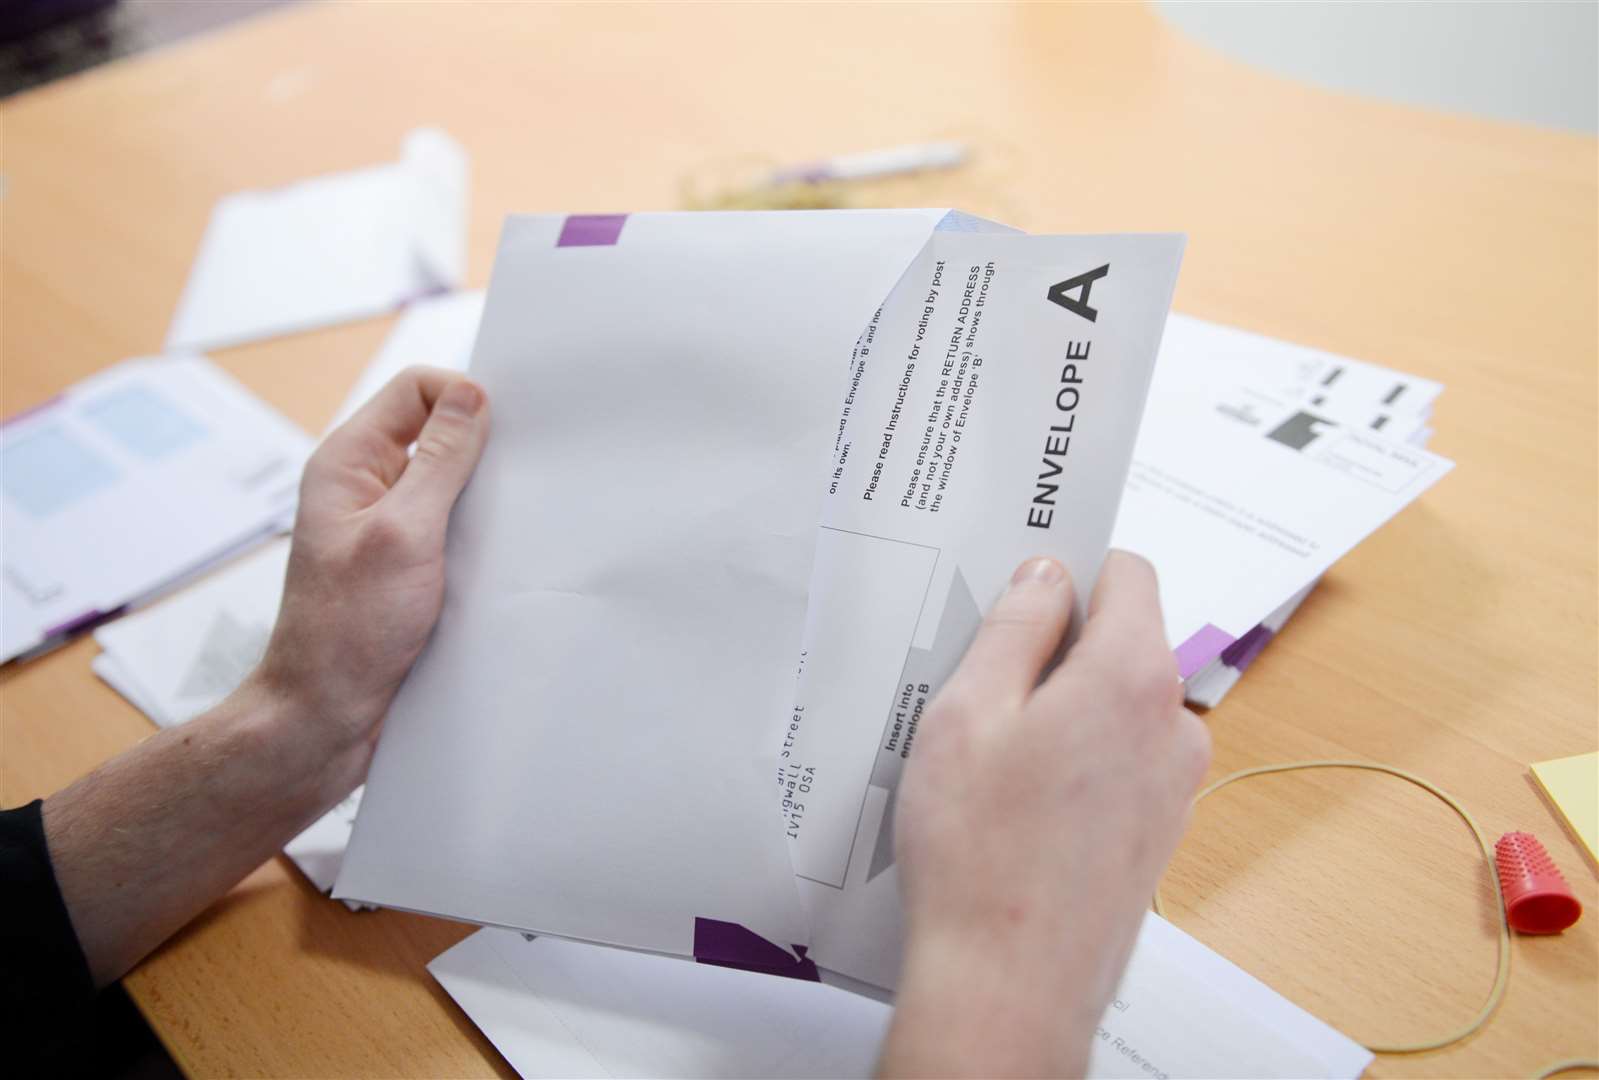 The deadline to register for postal voting is coming up soon.